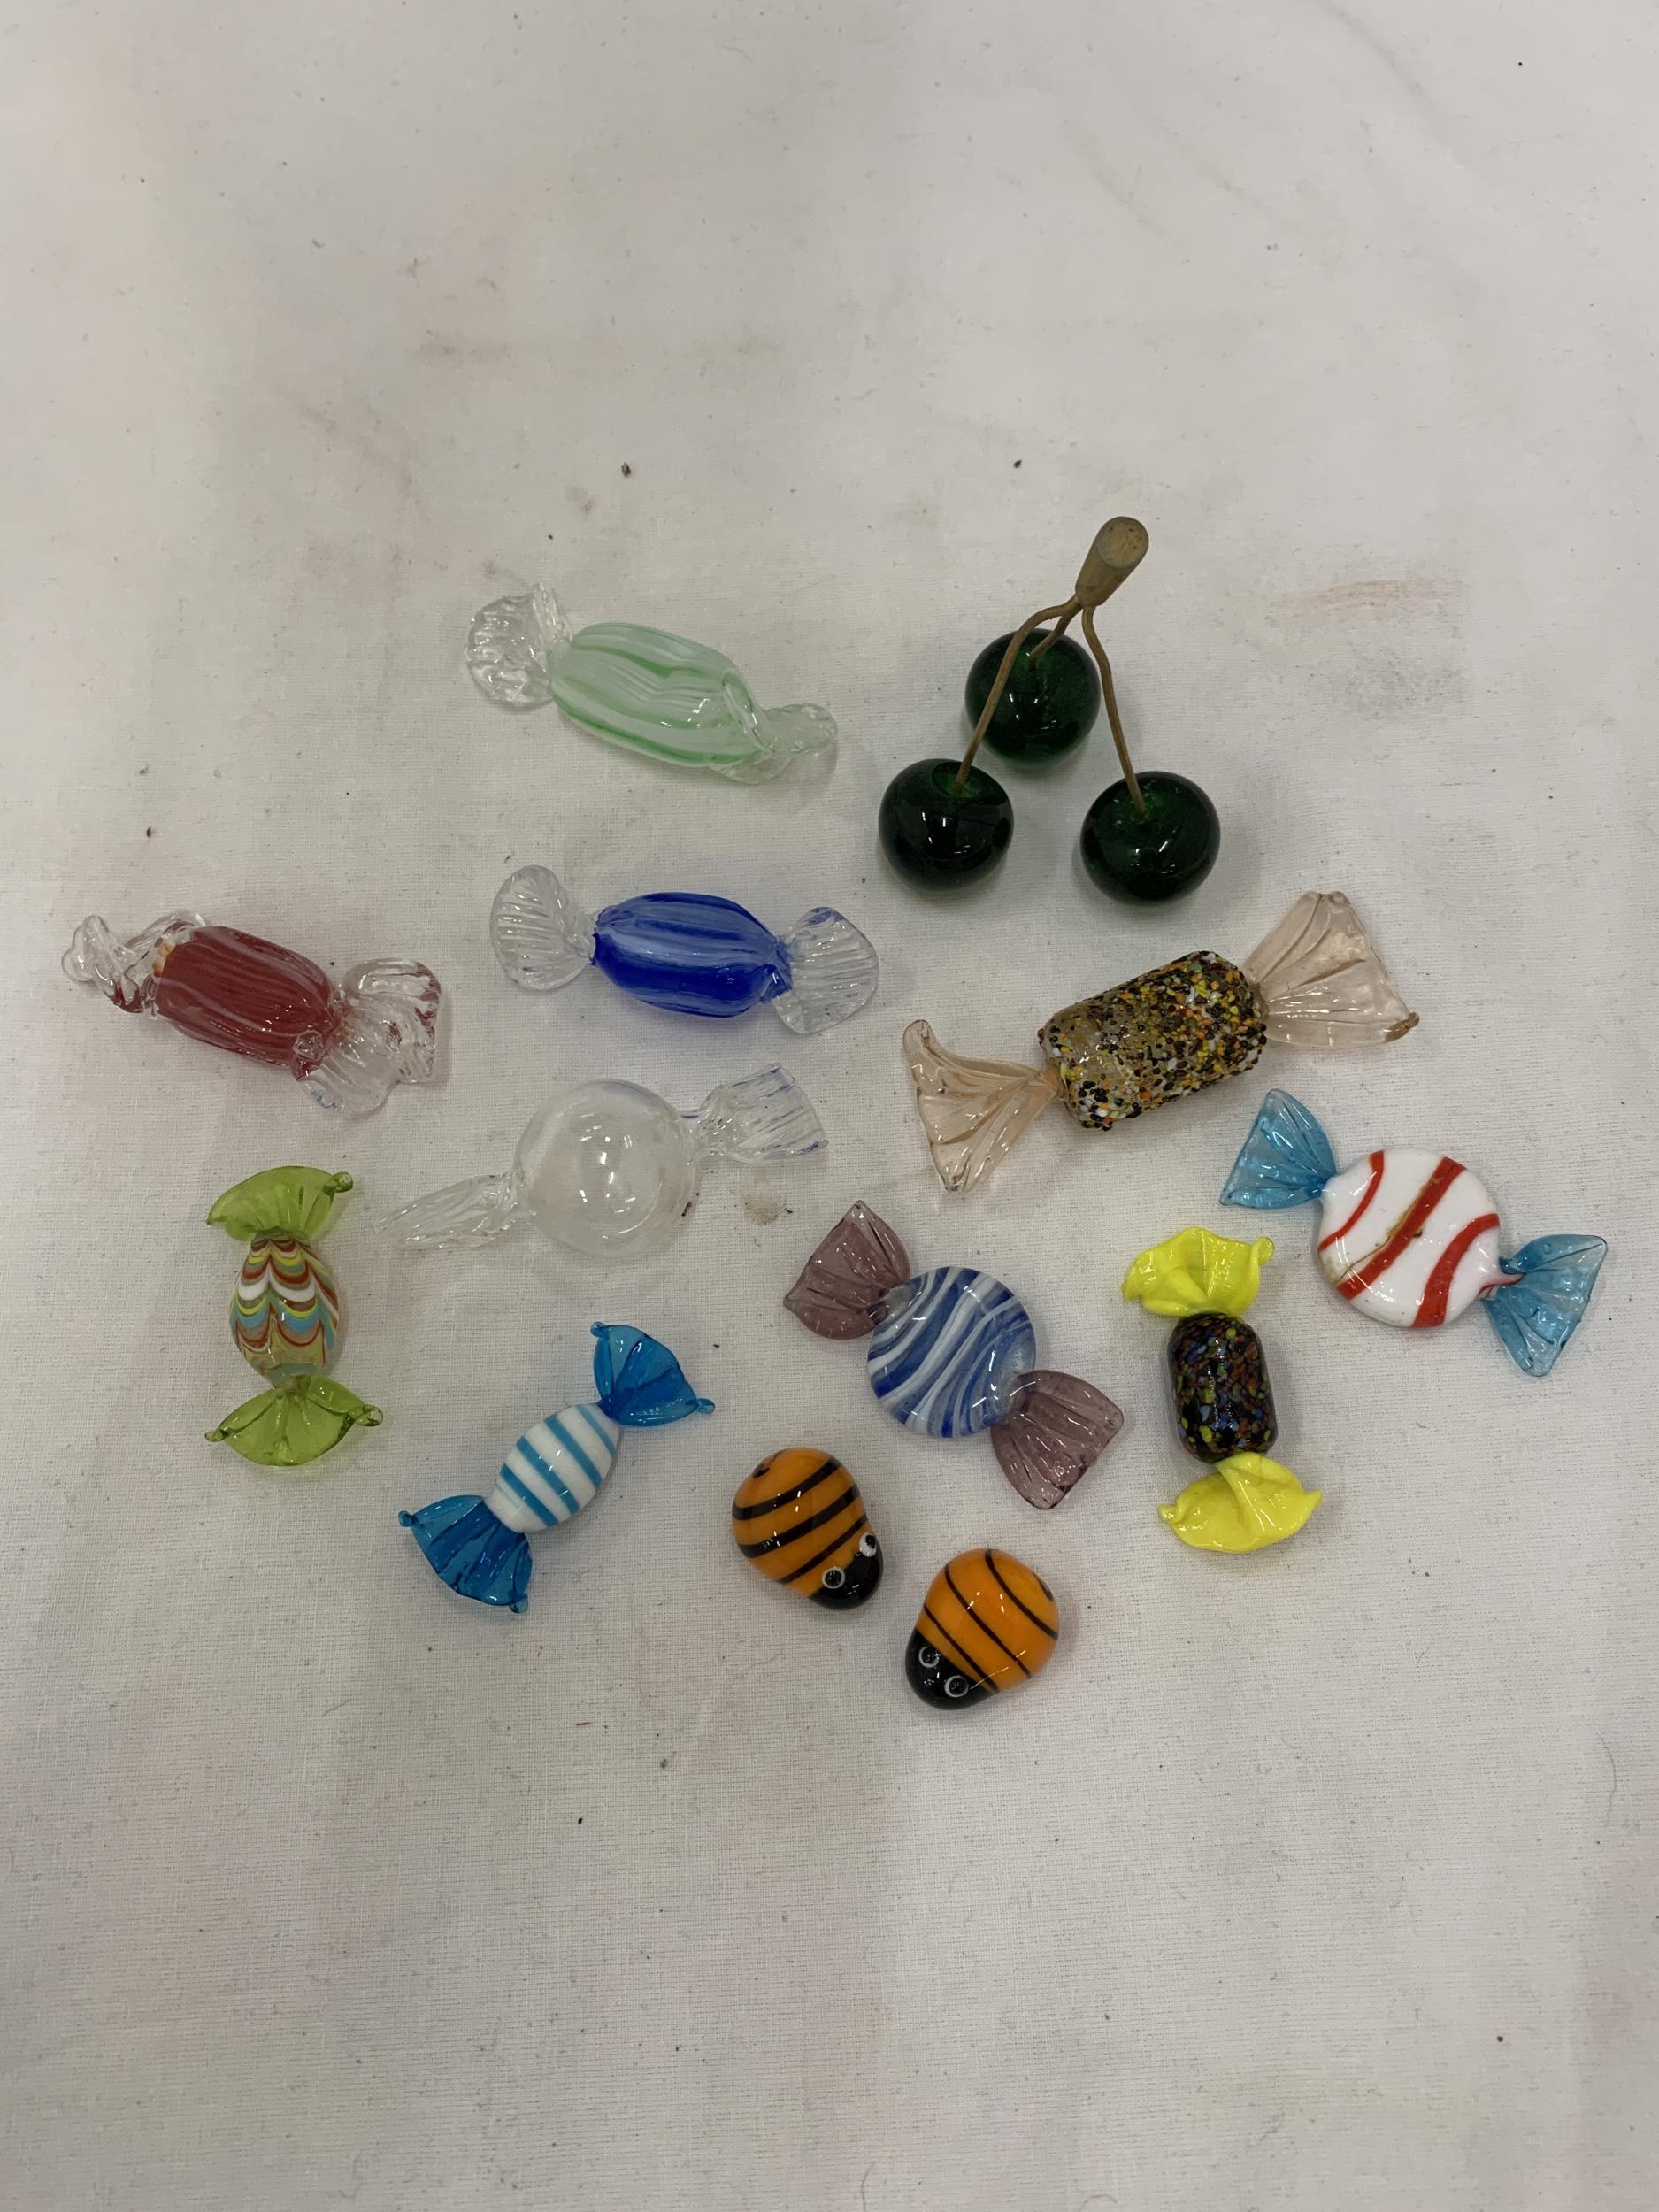 TEN MURANO STYLE GLASS SWEETS, PLUS CHERRIES AND TWO GLASS BEES